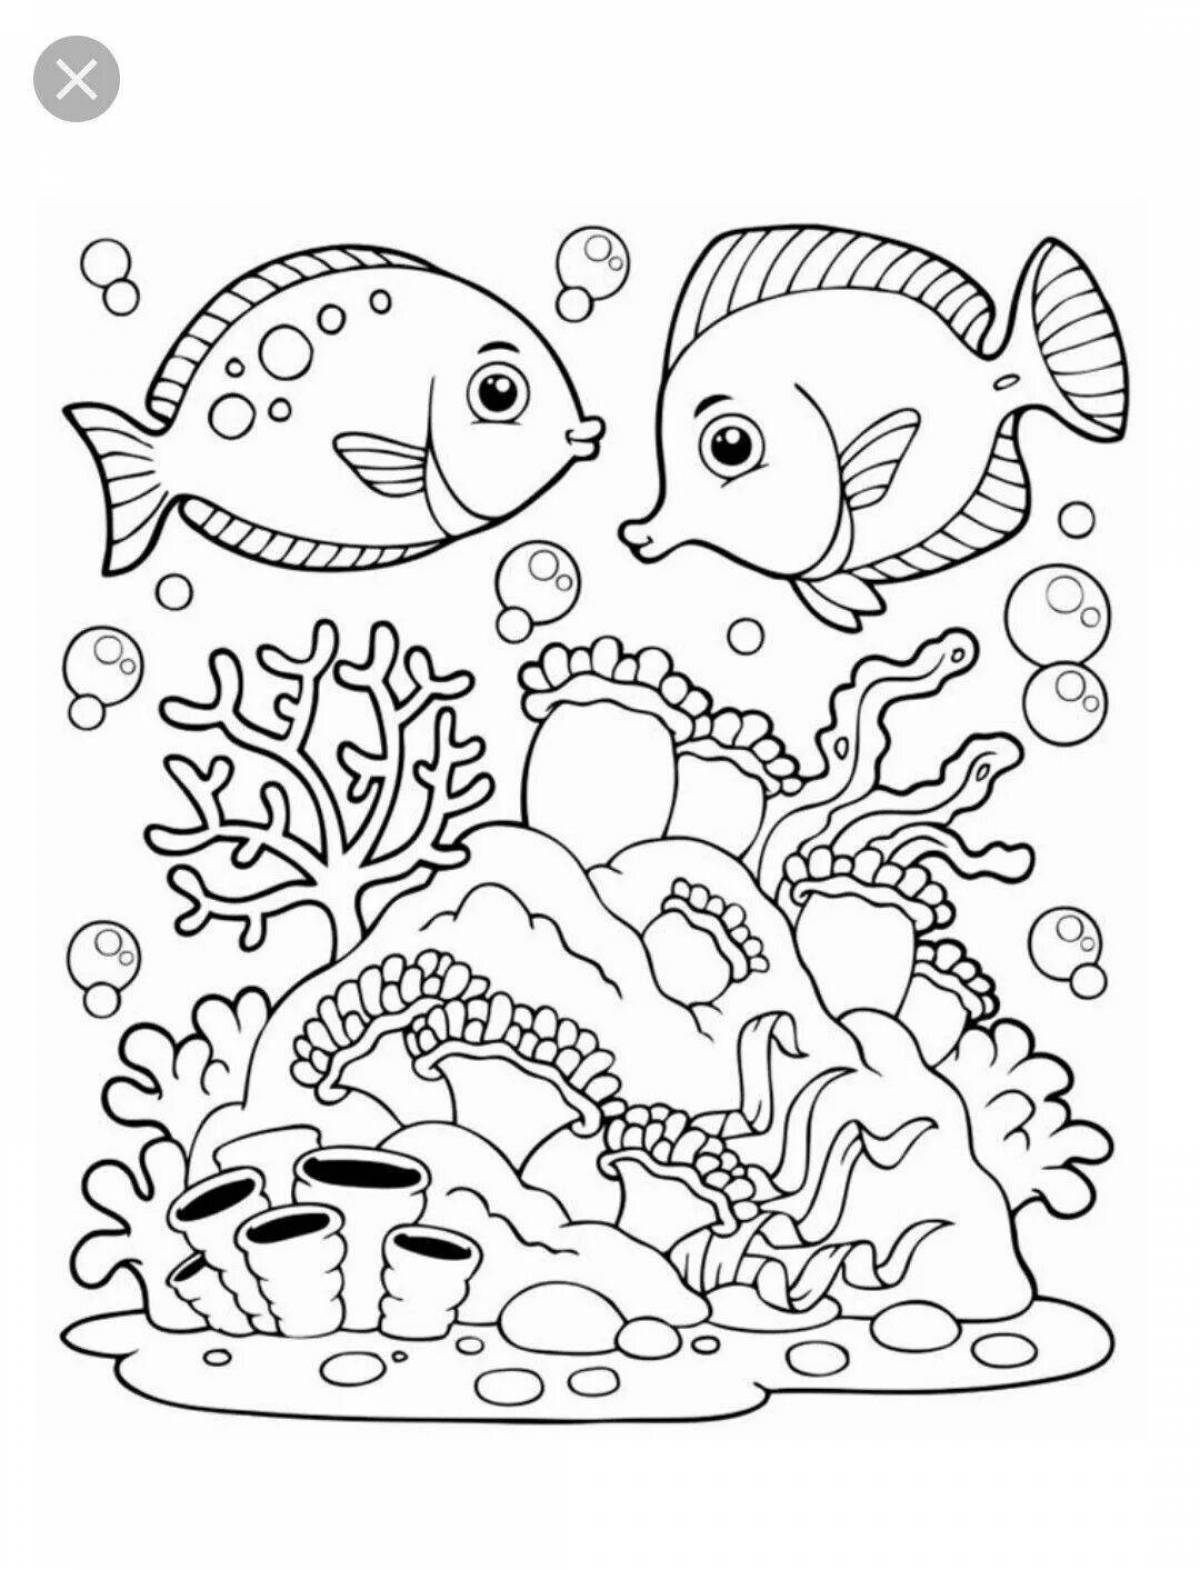 Amazing coloring pages of coral reefs